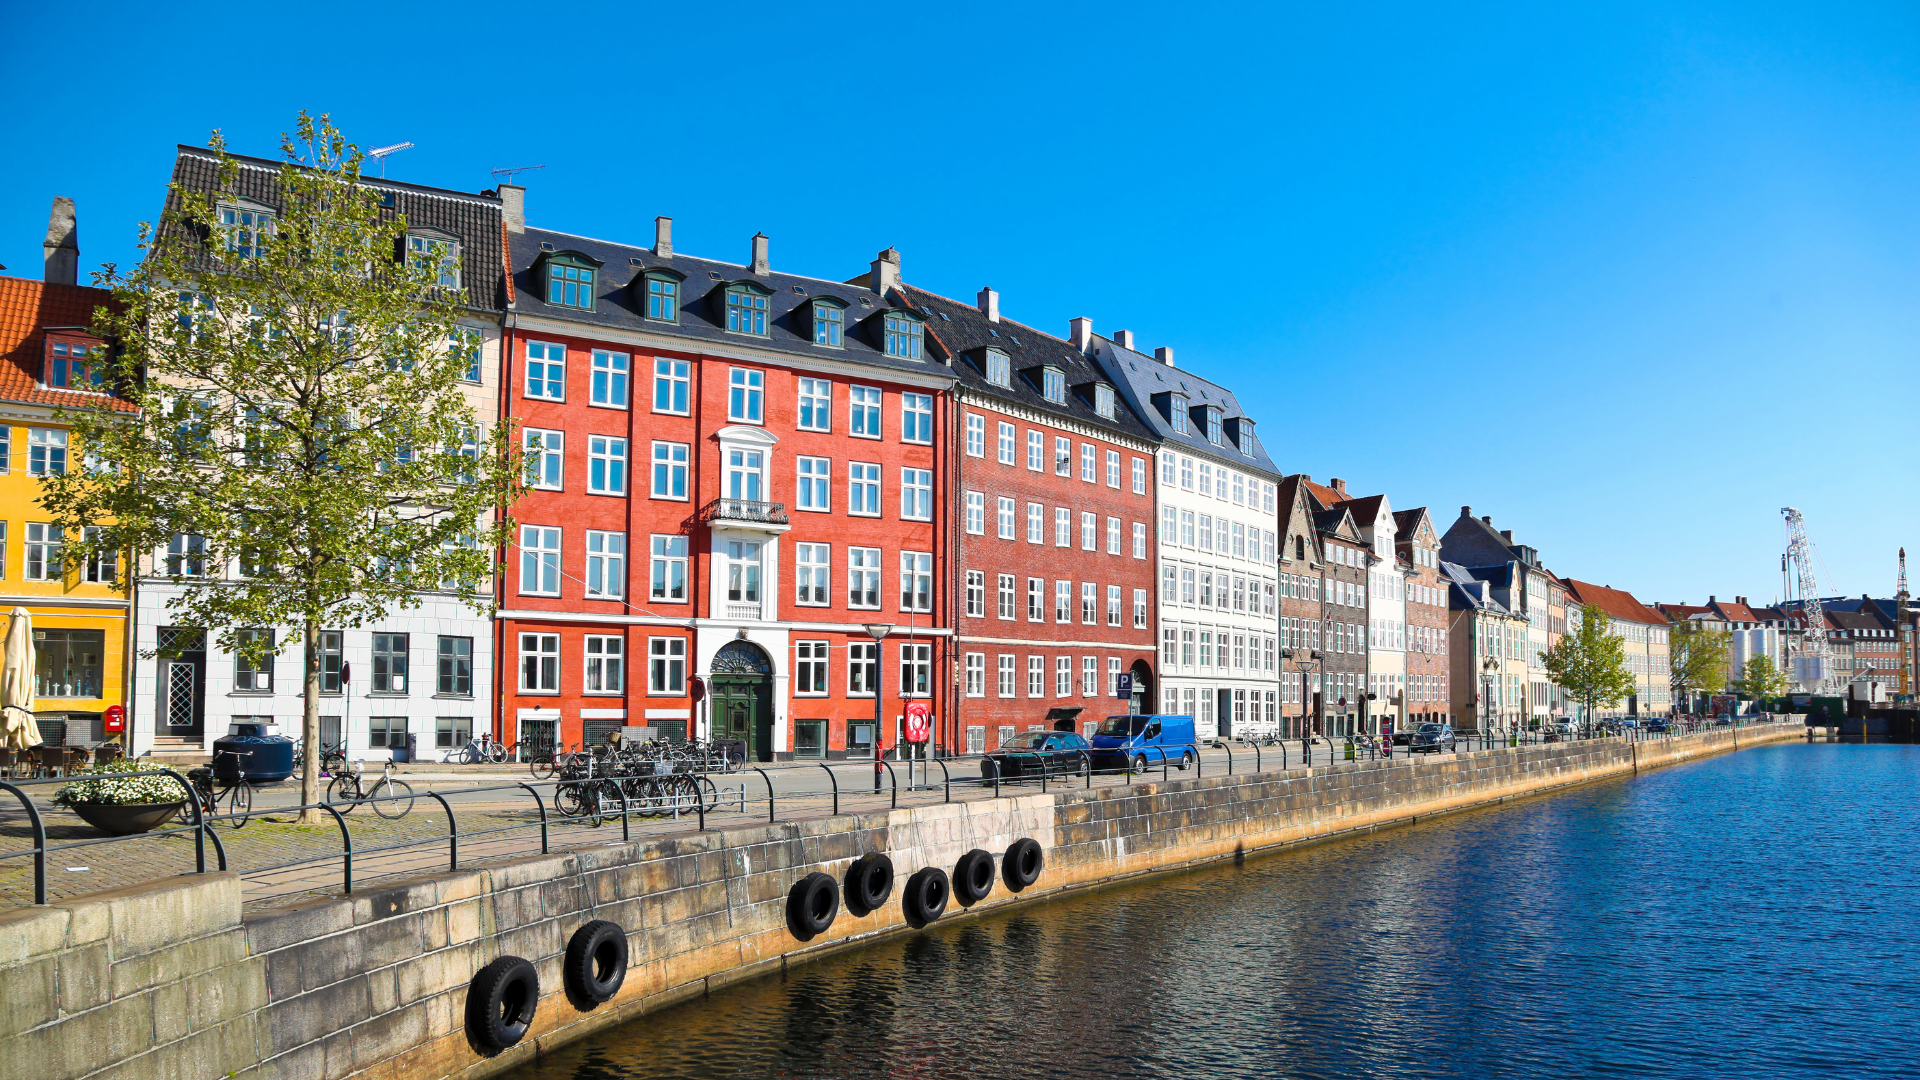 5 reasons why the education system in Denmark is excellent